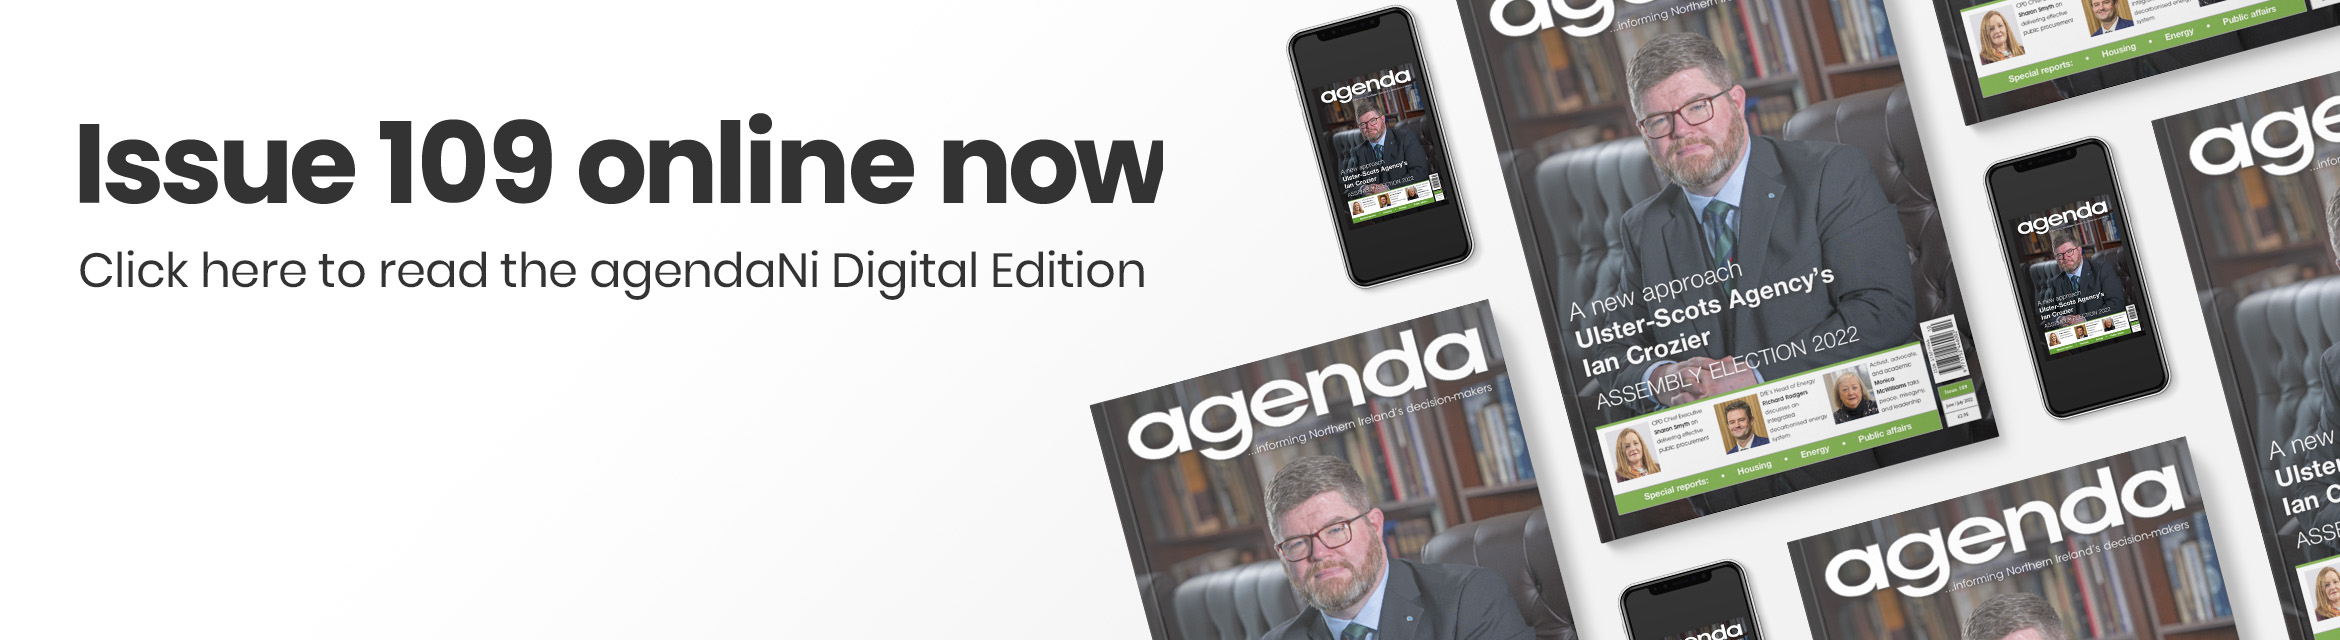 Issue 109 online now. Click here to read the agendaNi Digital Edition.